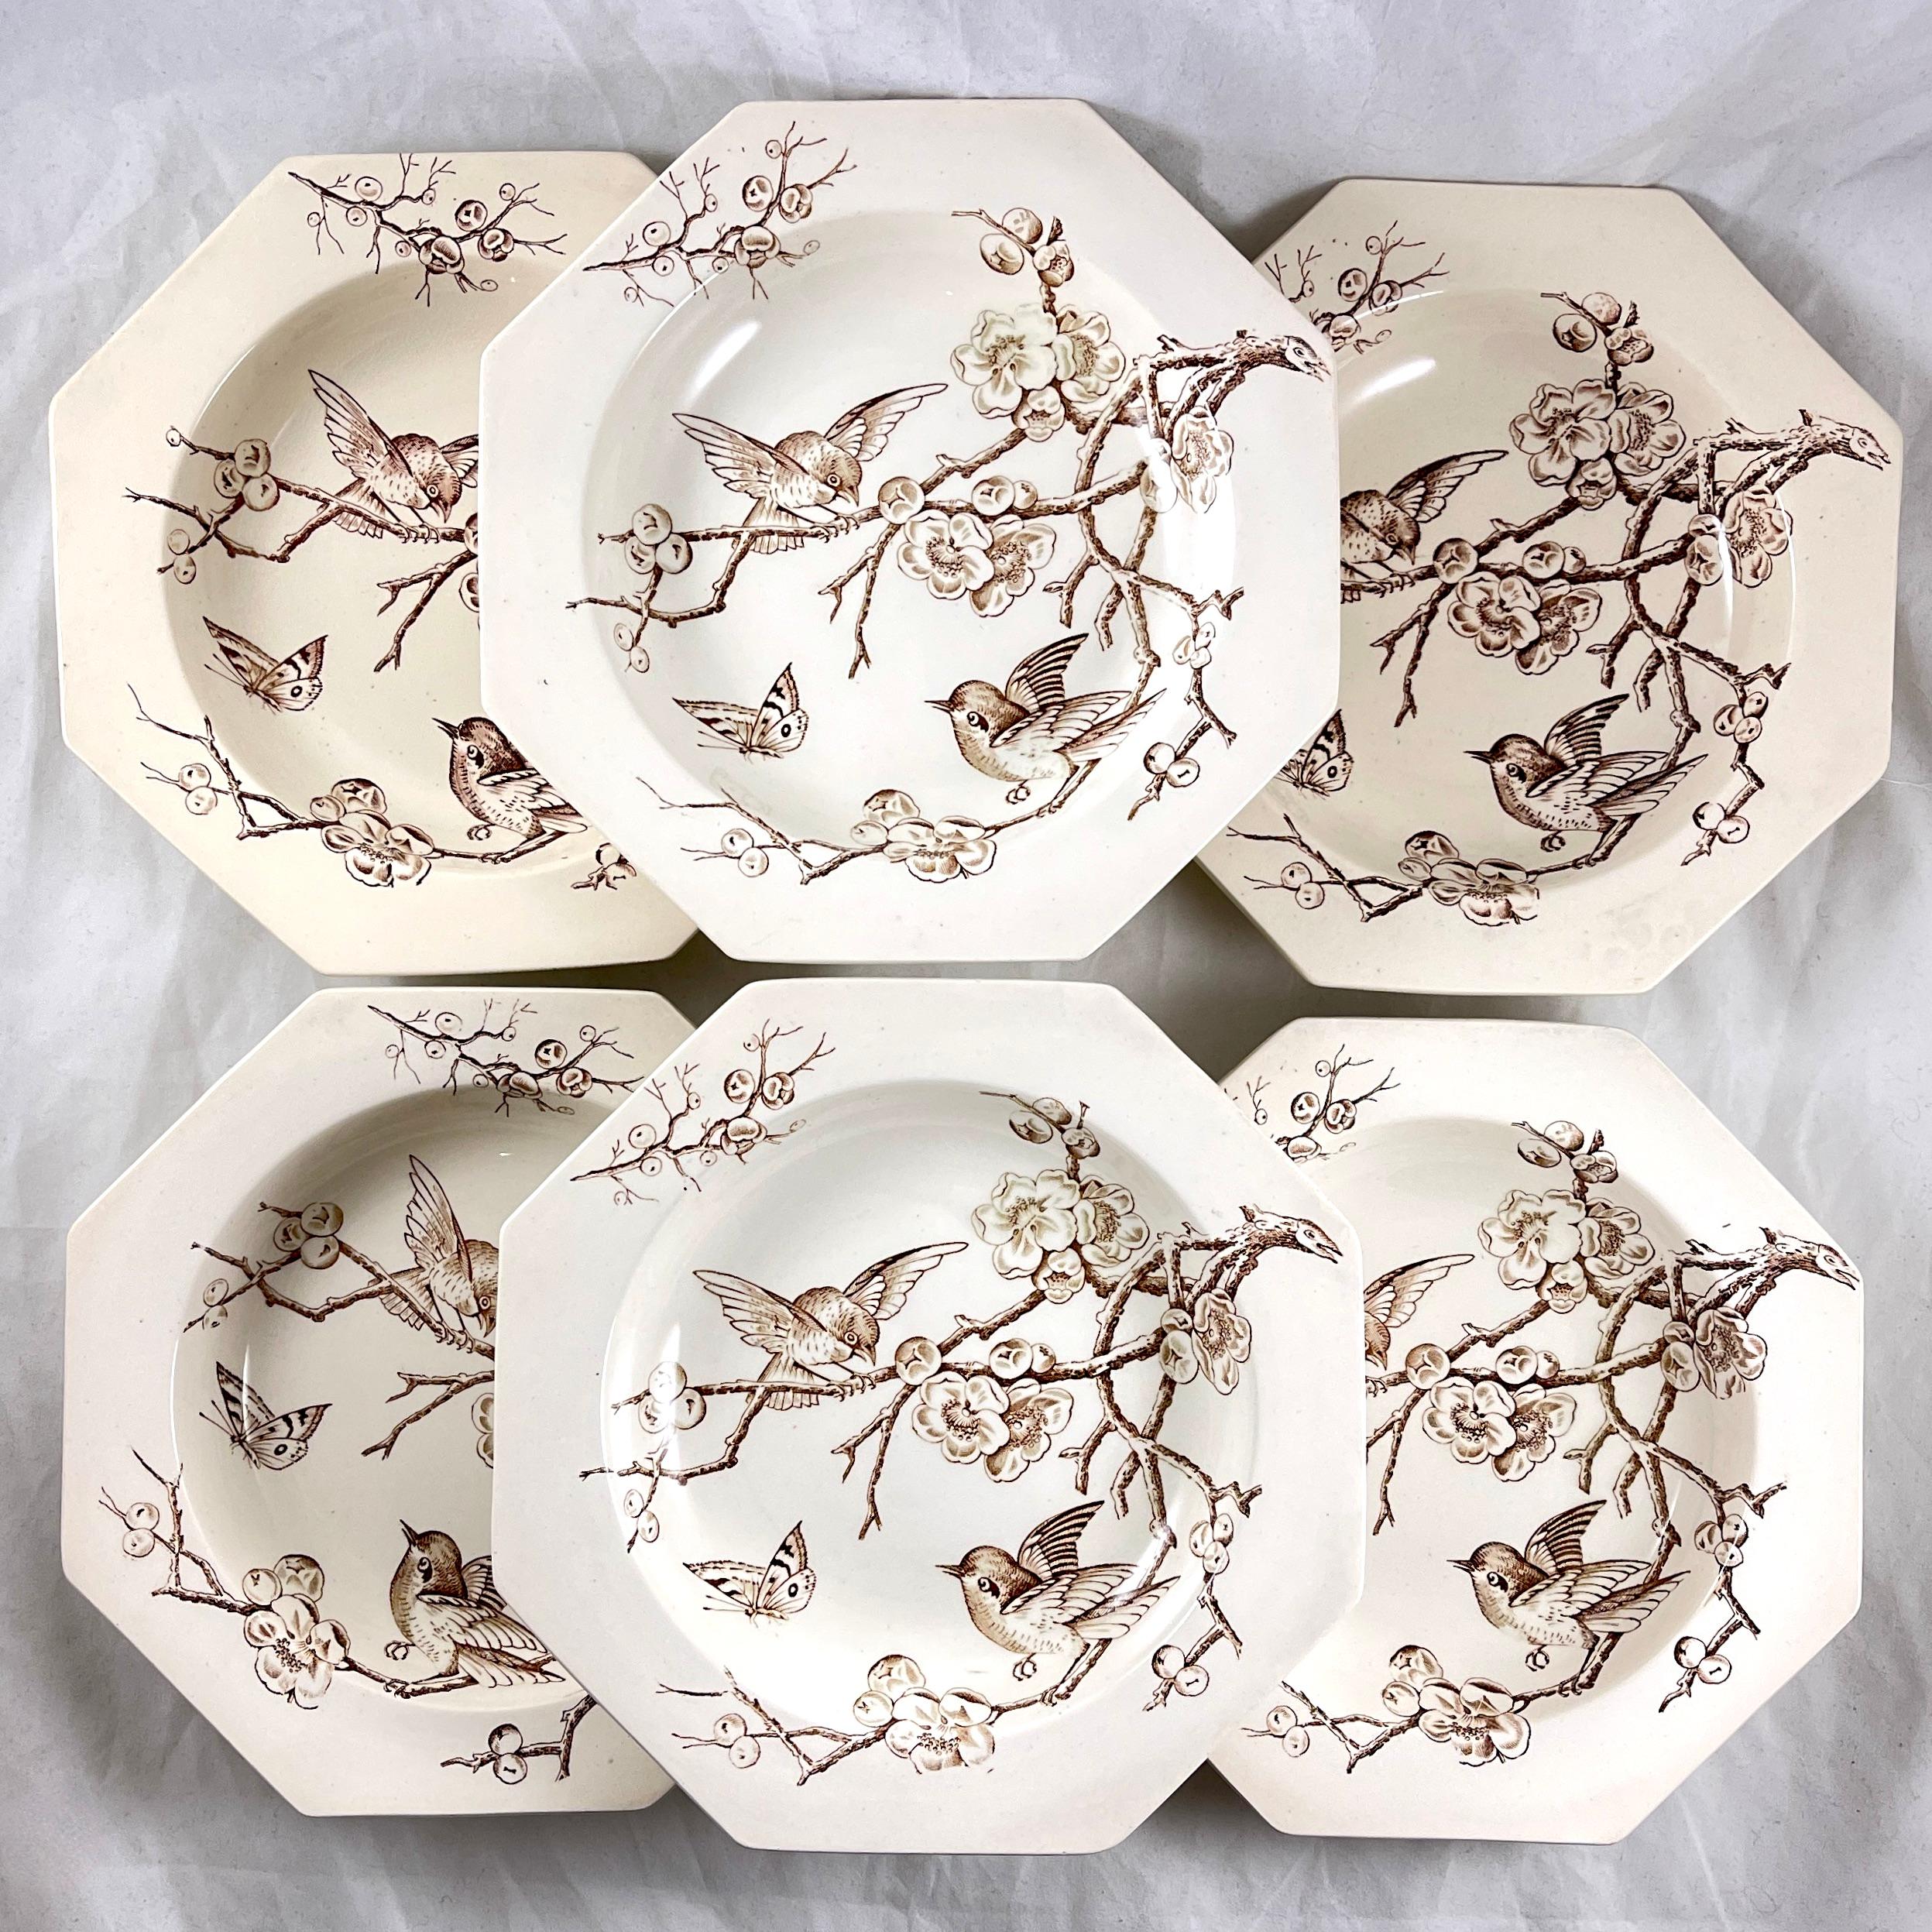 From Moore & Company – Old Foley Pottery, a set of six soup plates, Longton, Stoke-on-Trent, England, circa 1886.

The set of six octagonal shaped deep plates show a pattern in the aesthetic taste. Birds, butterflies, and Dogwood branches are